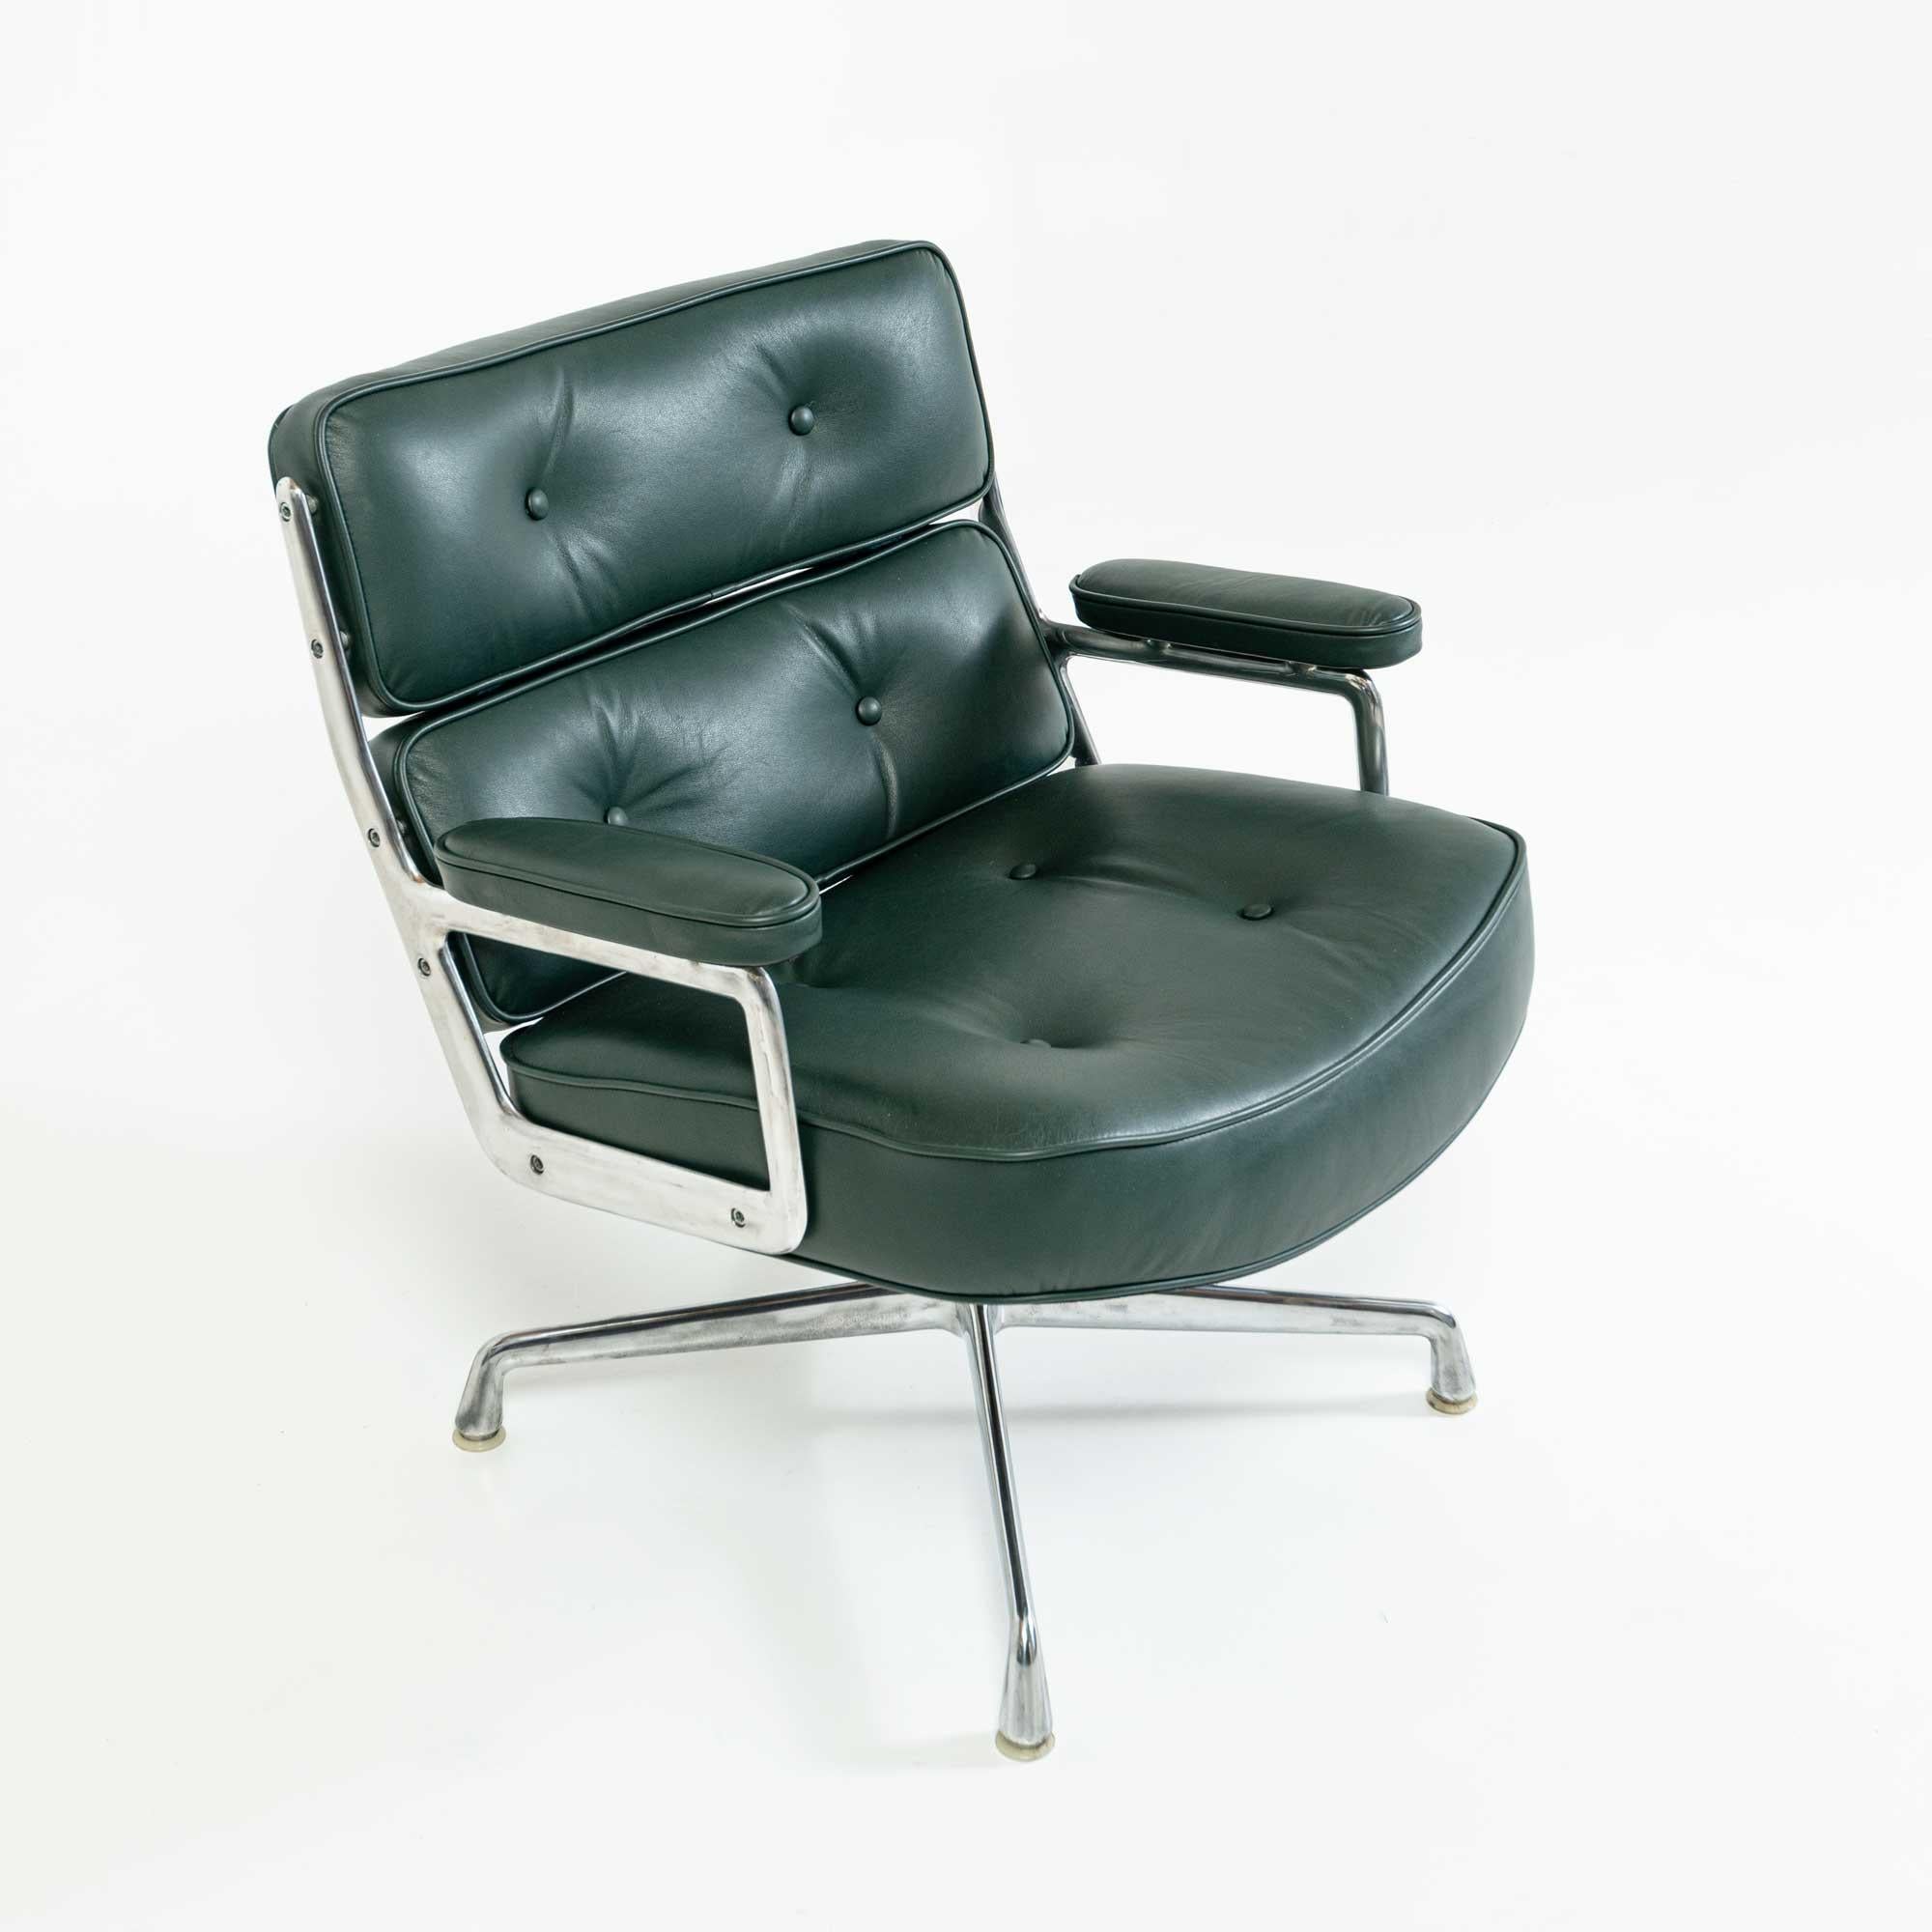 Mid-Century Modern Eames Time Life Lobby Lounge Chair ES105/675 in Midnight Green Aniline Leather